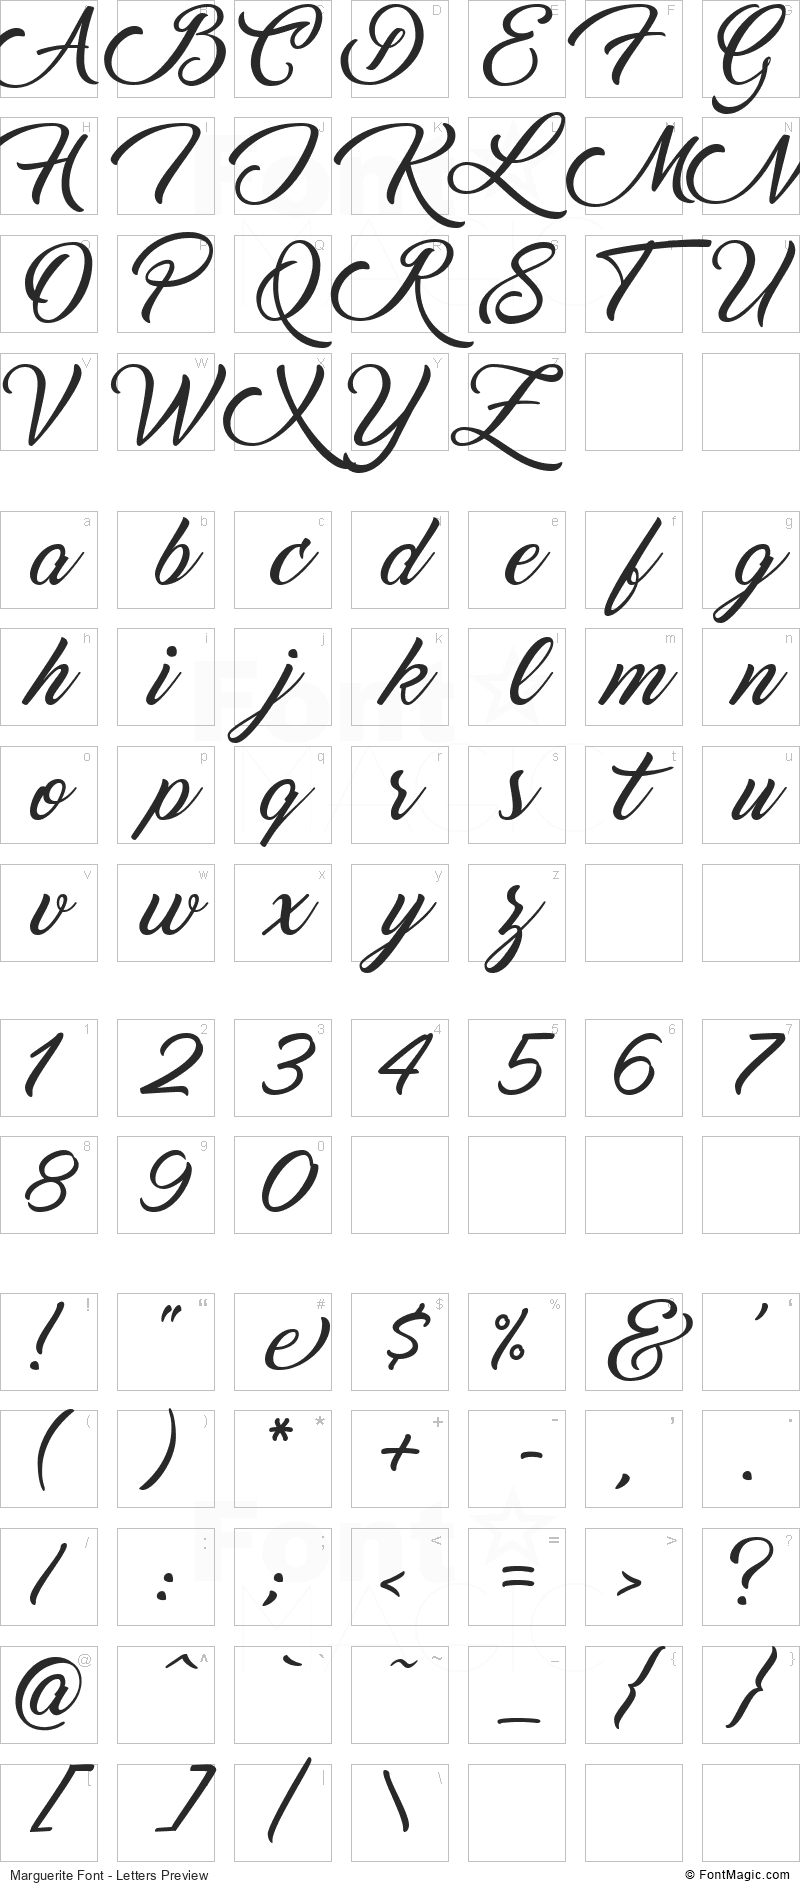 Marguerite Font - All Latters Preview Chart